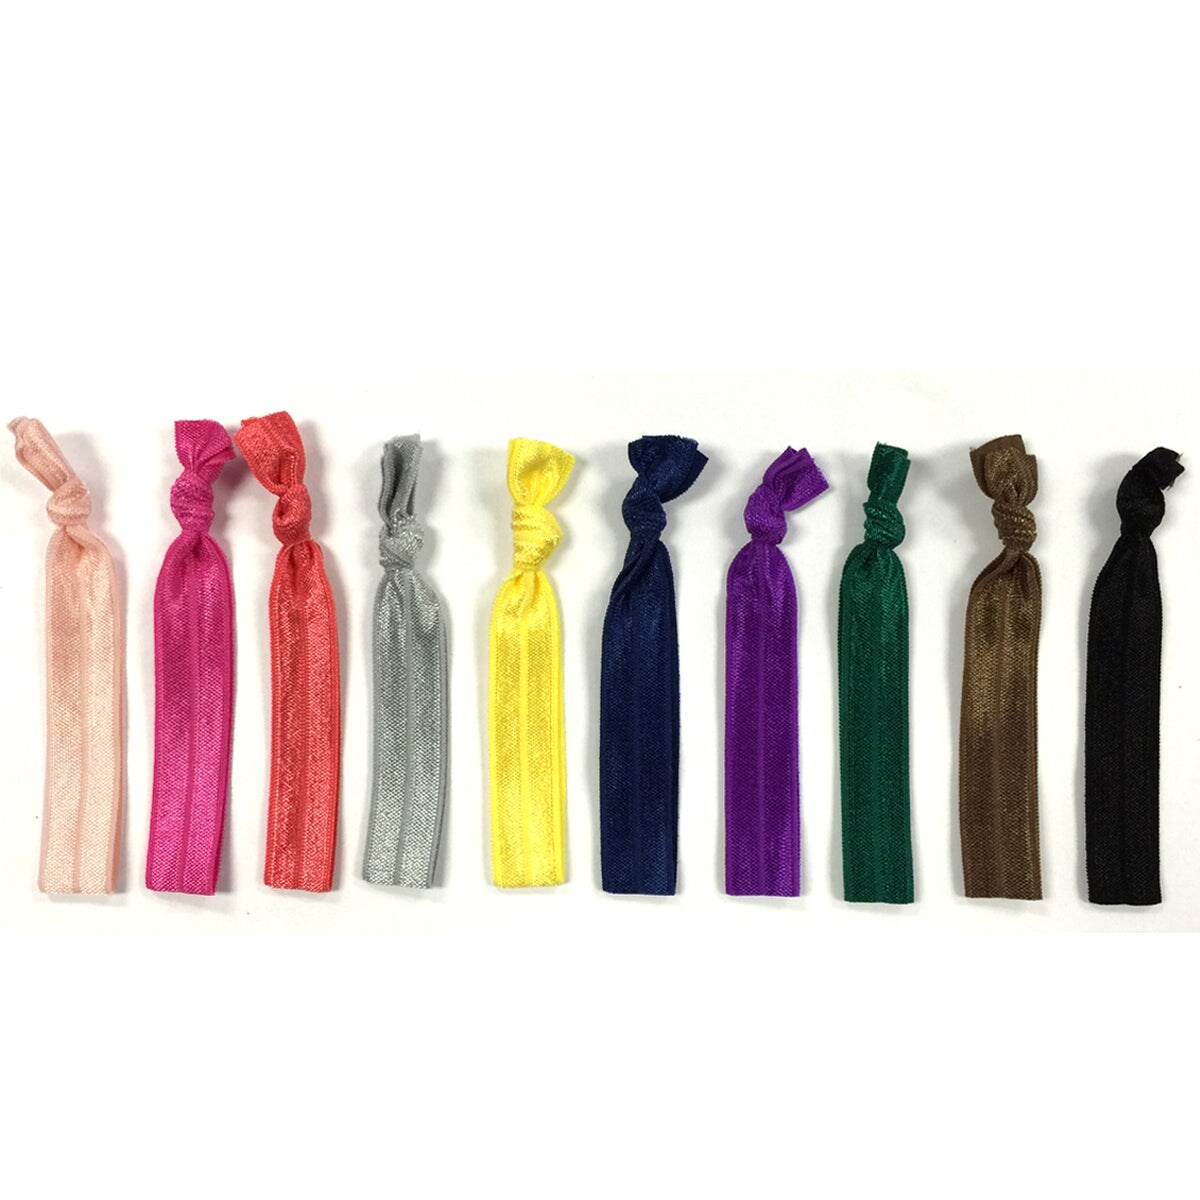 Wrapables 10 Pack Elastic Hair Ties Ponytail Holder, Bold and Vibrant